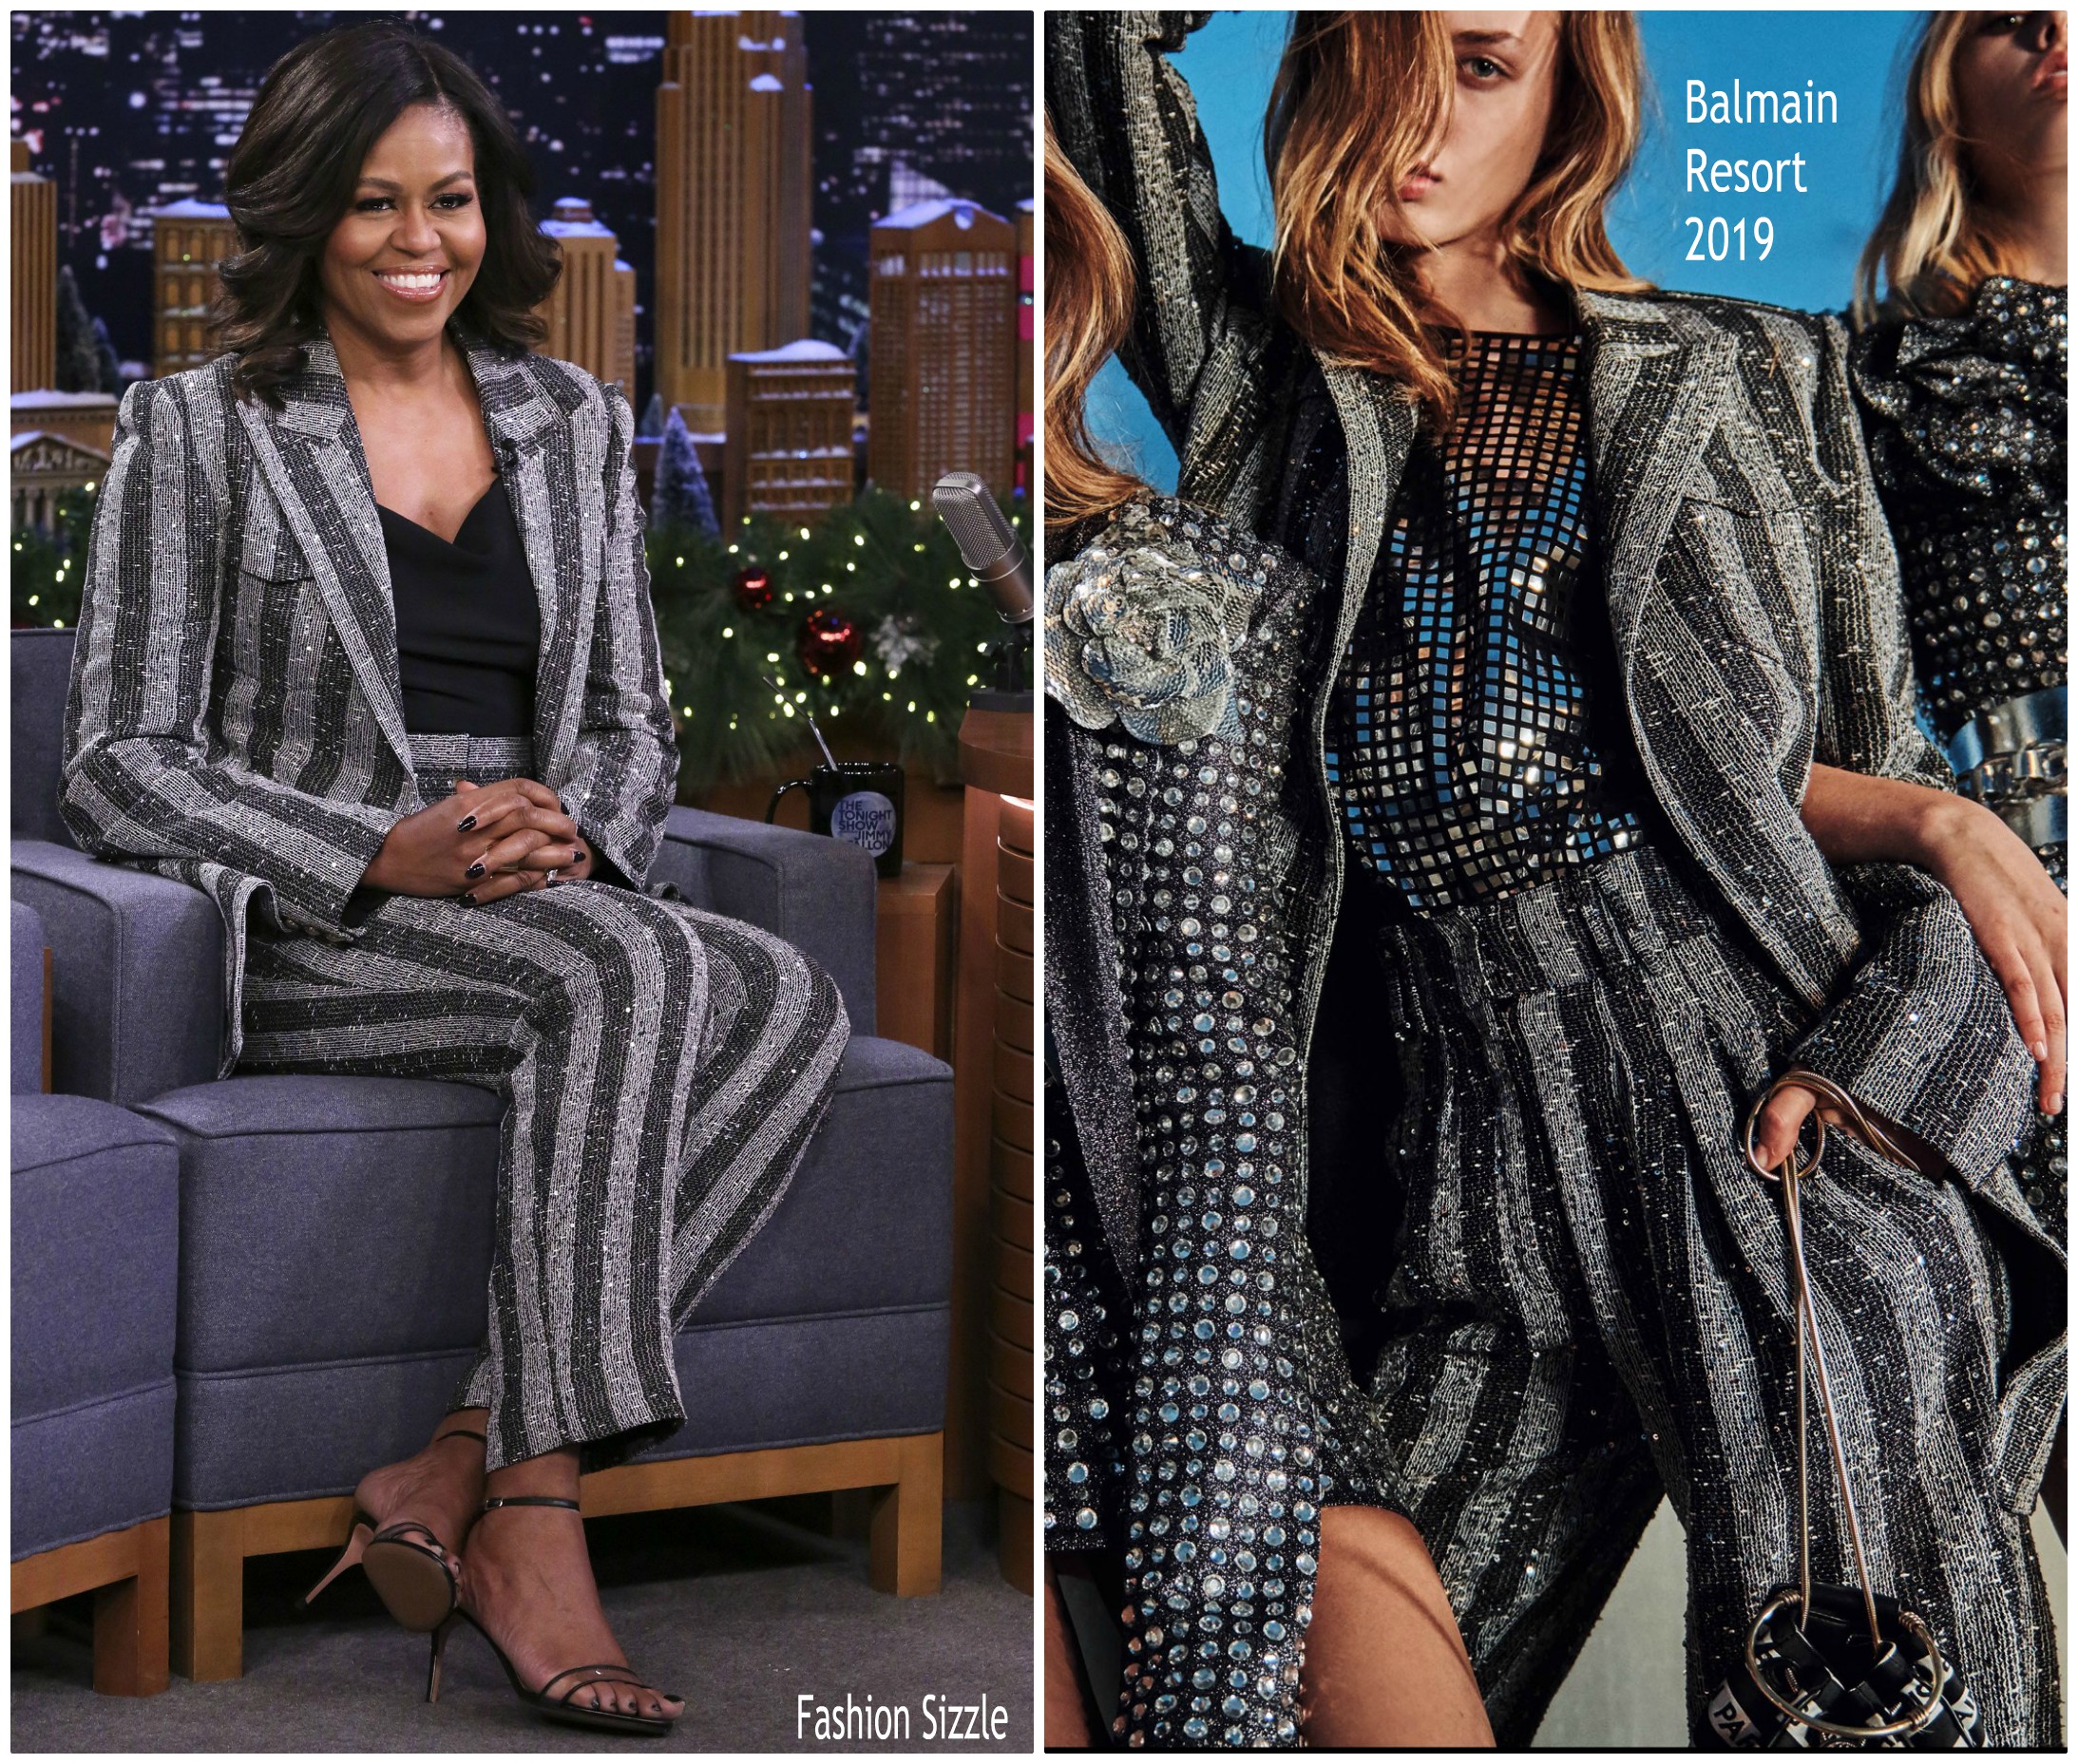 michelle-obama-in-balmain-becoming-book-tour